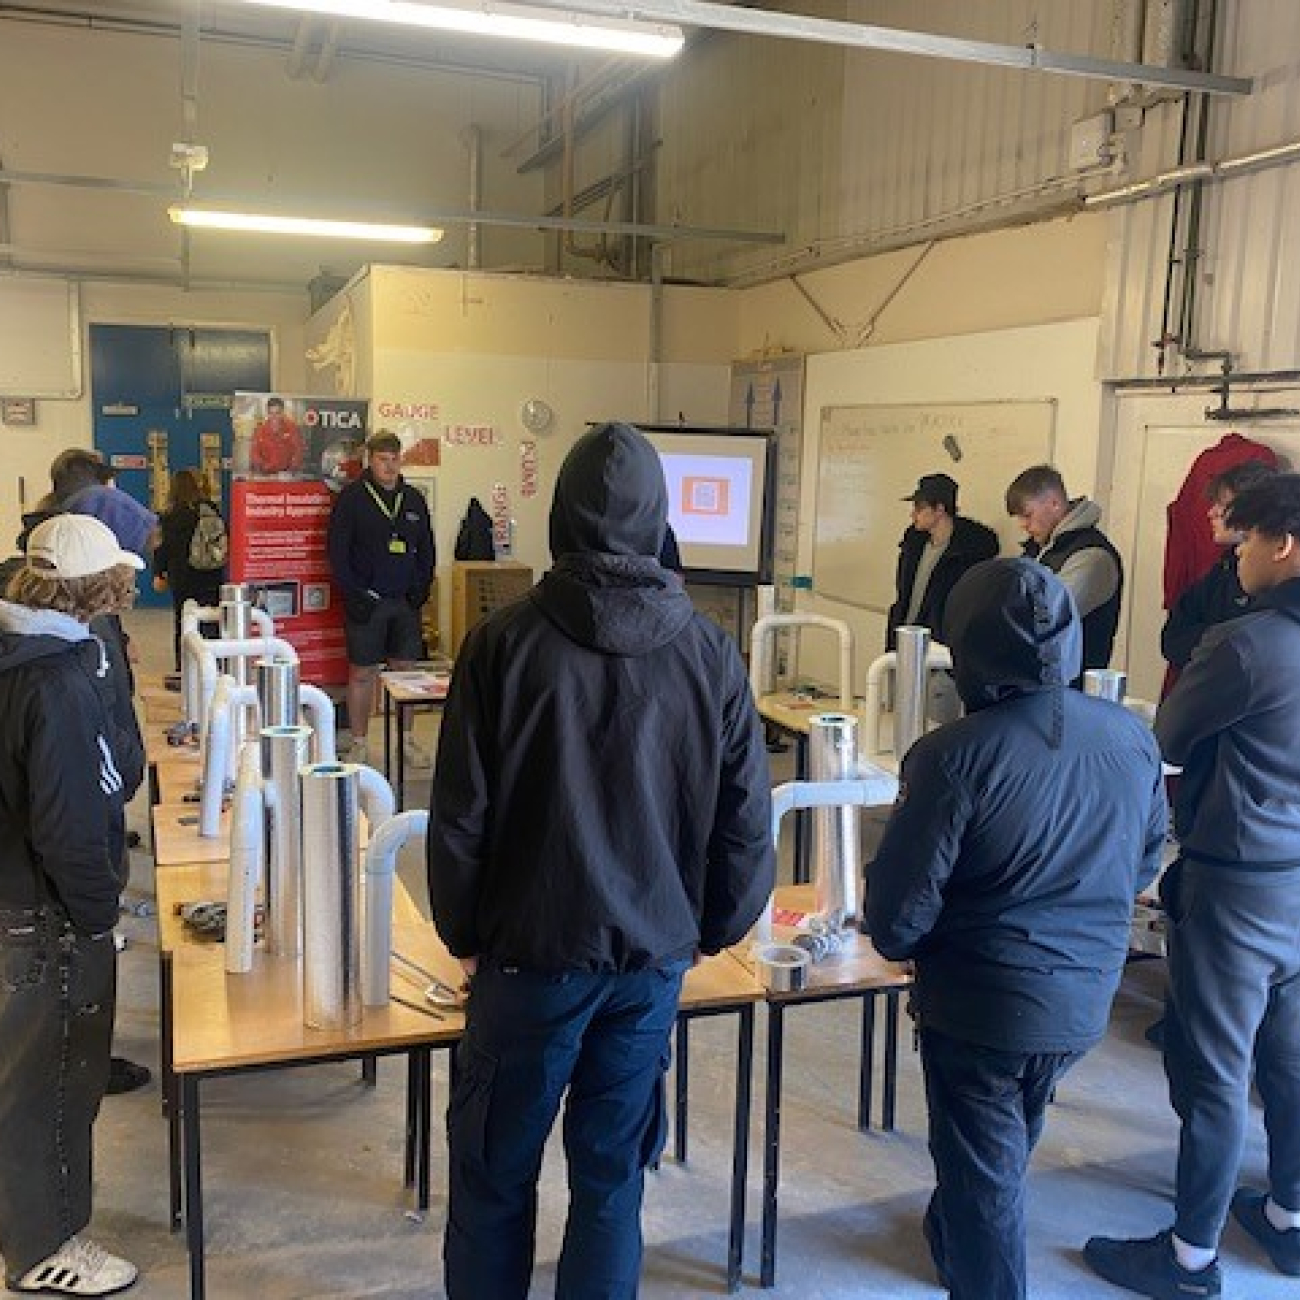 Plastering learners listening to guest talk from Tica Acad